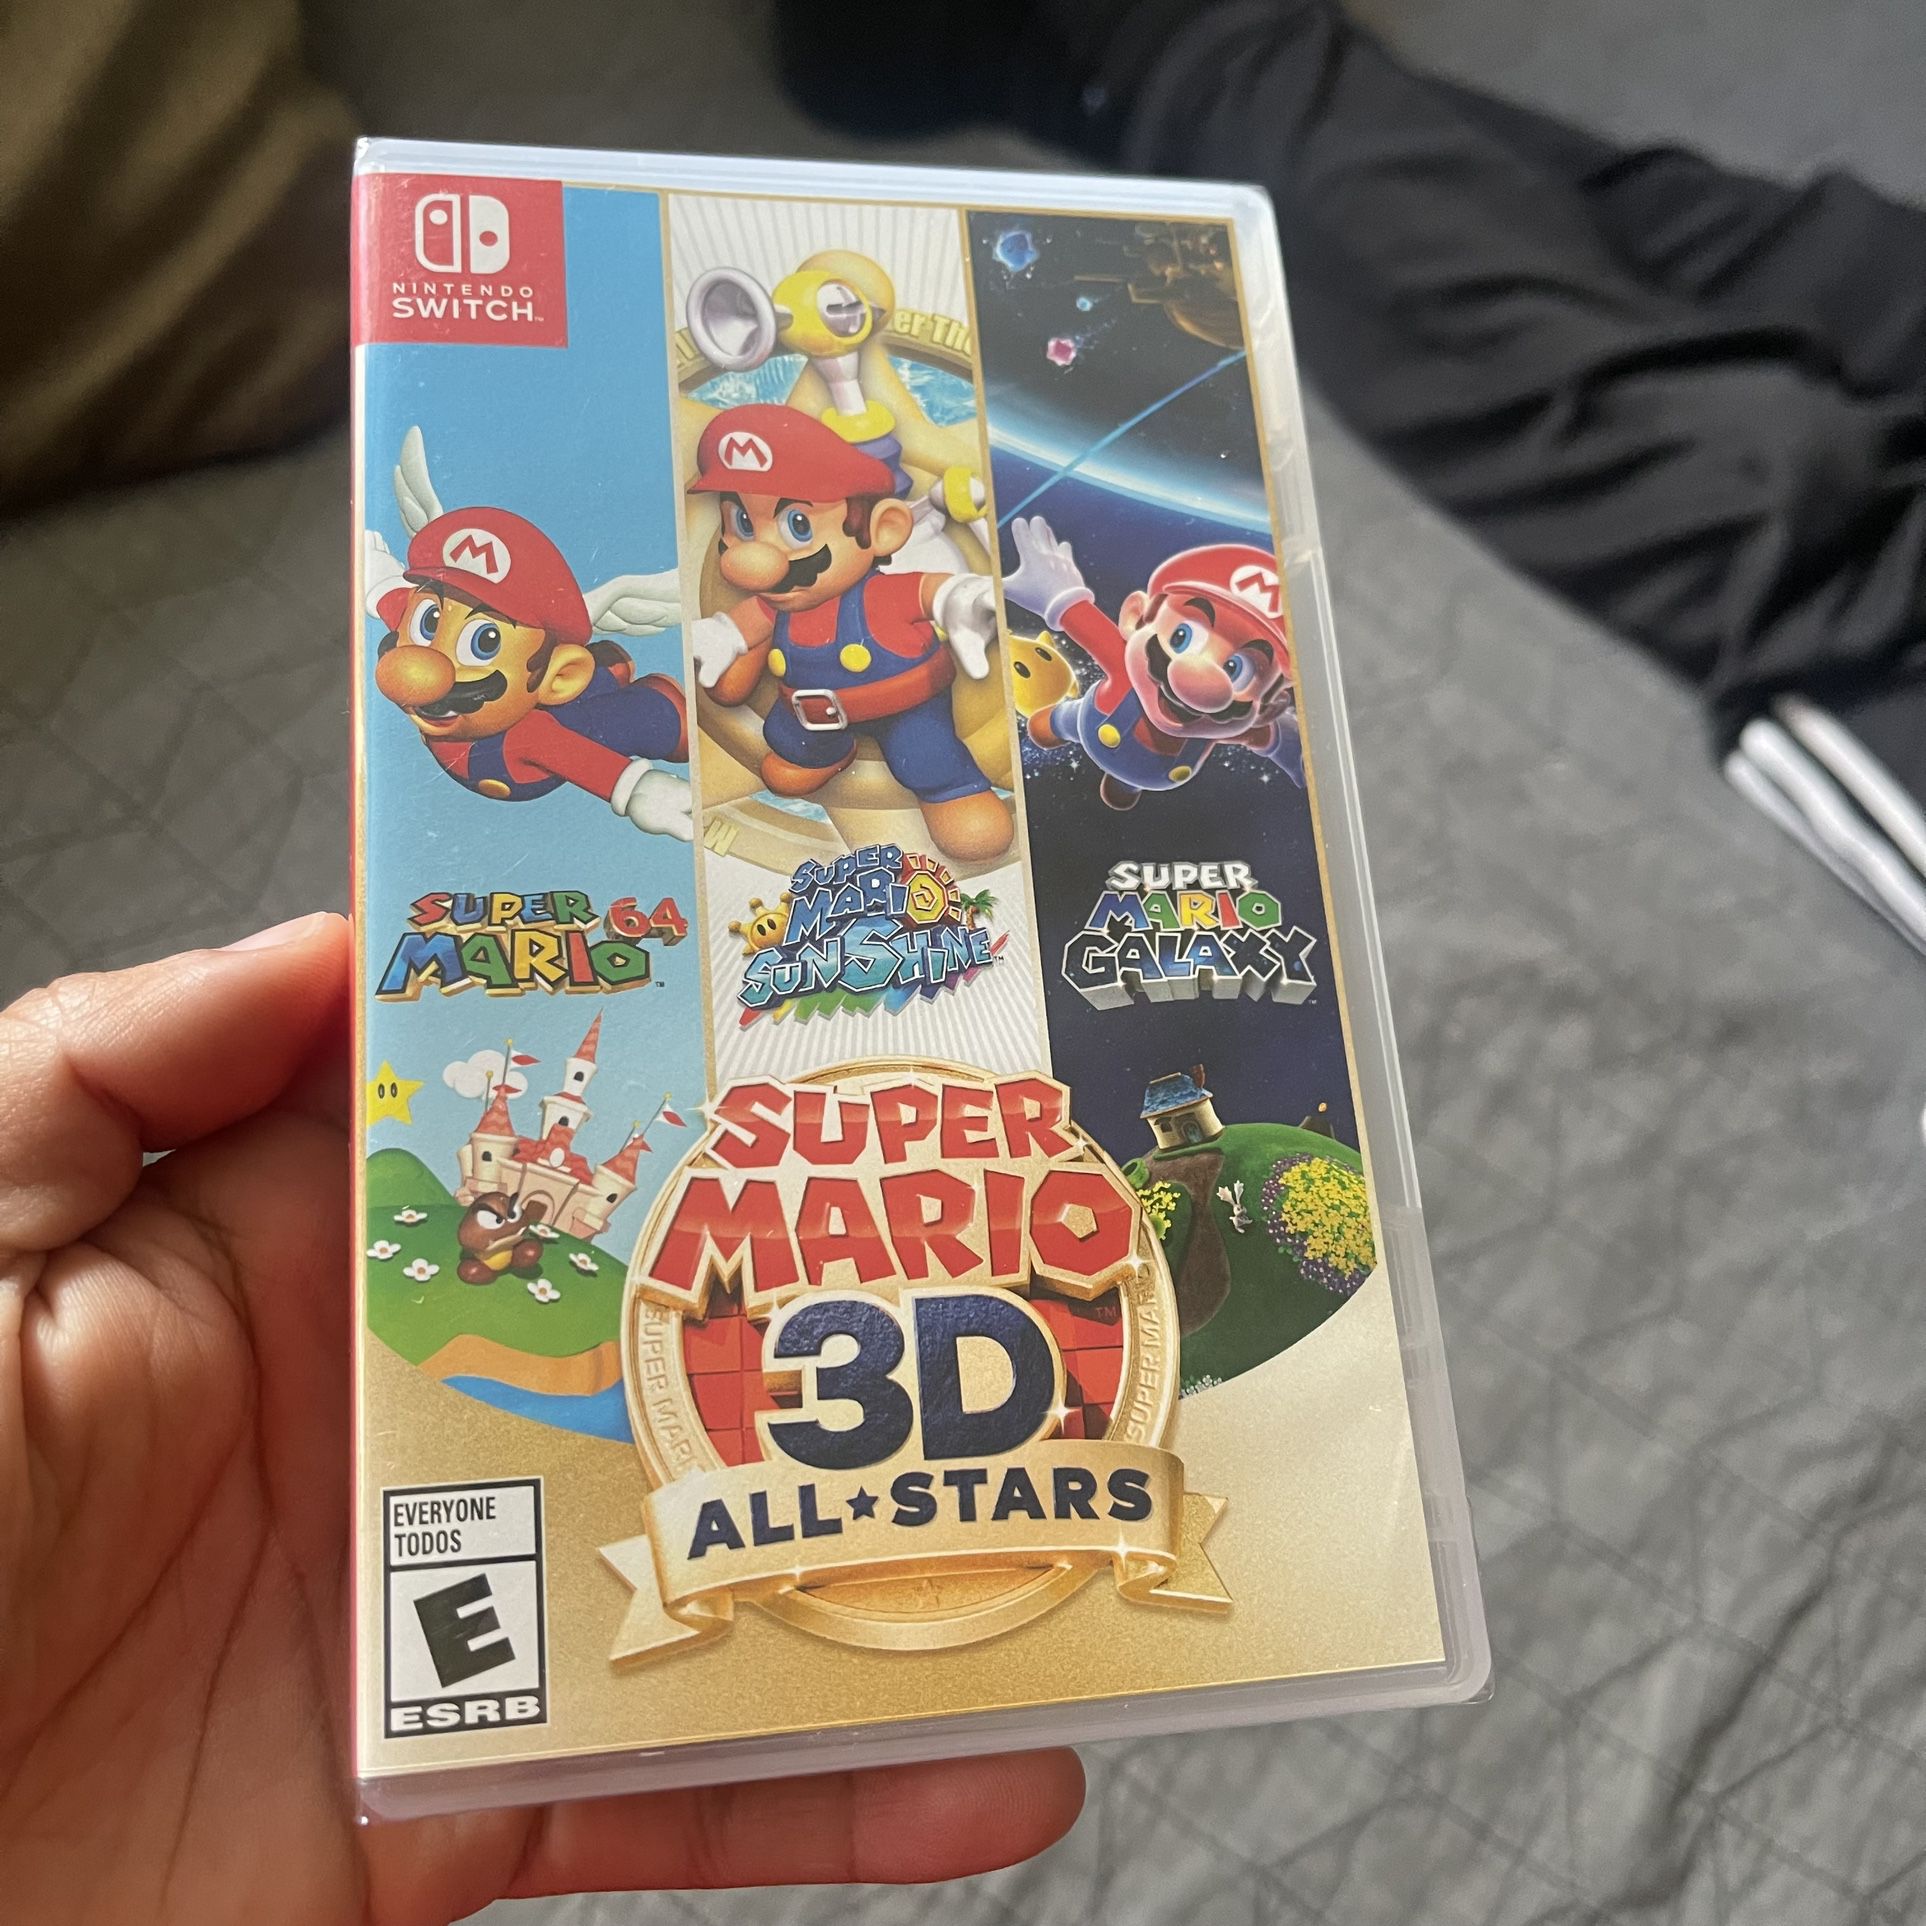 Super Mario 3d all stars brand new and sealed US Version